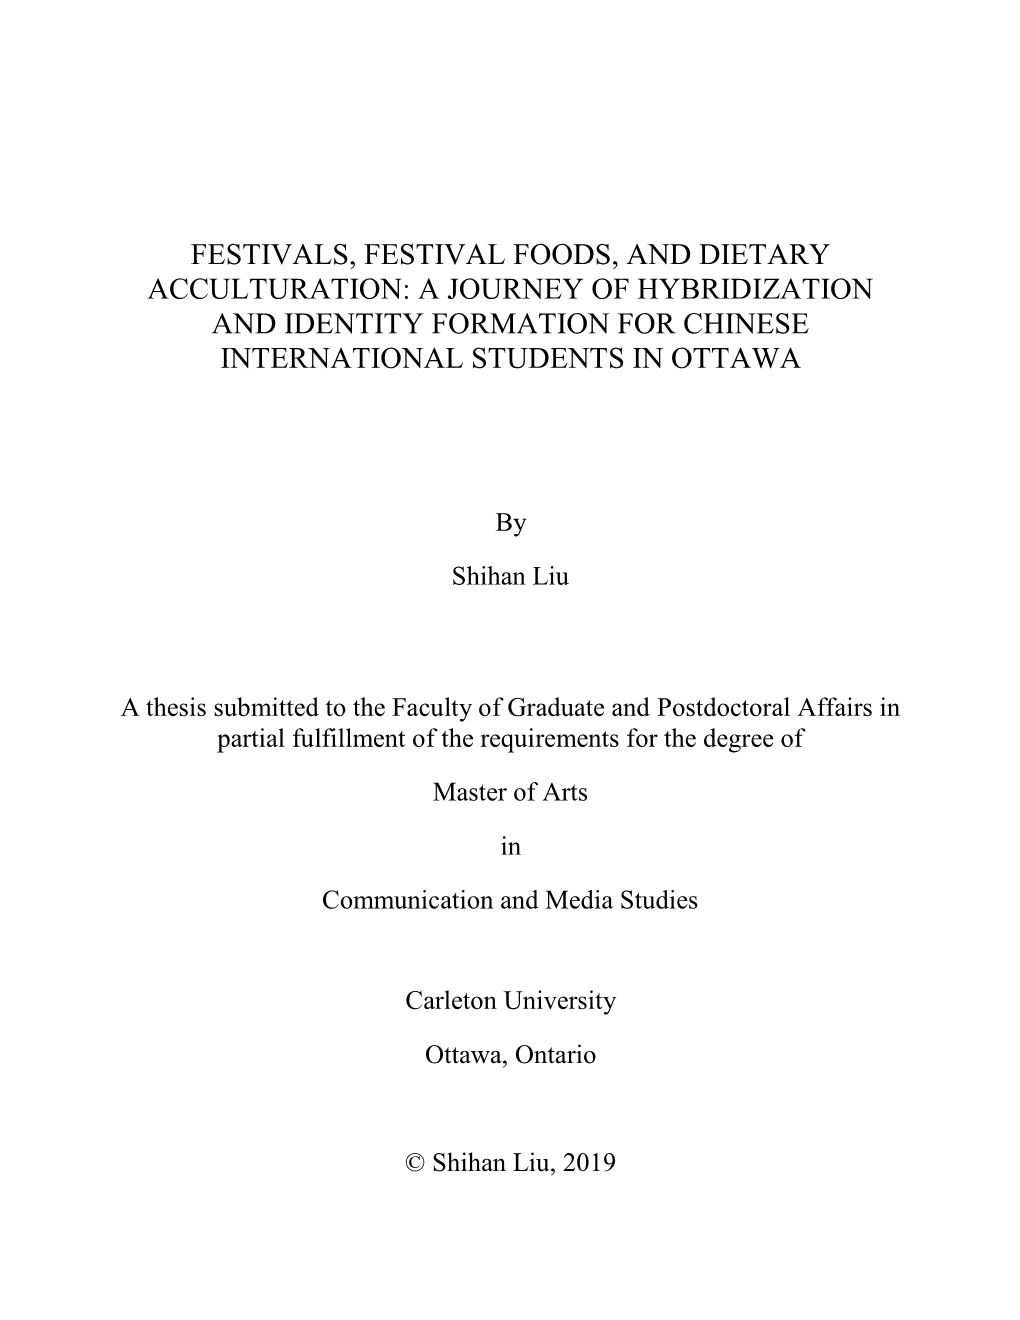 Festivals, Festival Foods, and Dietary Acculturation: a Journey of Hybridization and Identity Formation for Chinese International Students in Ottawa